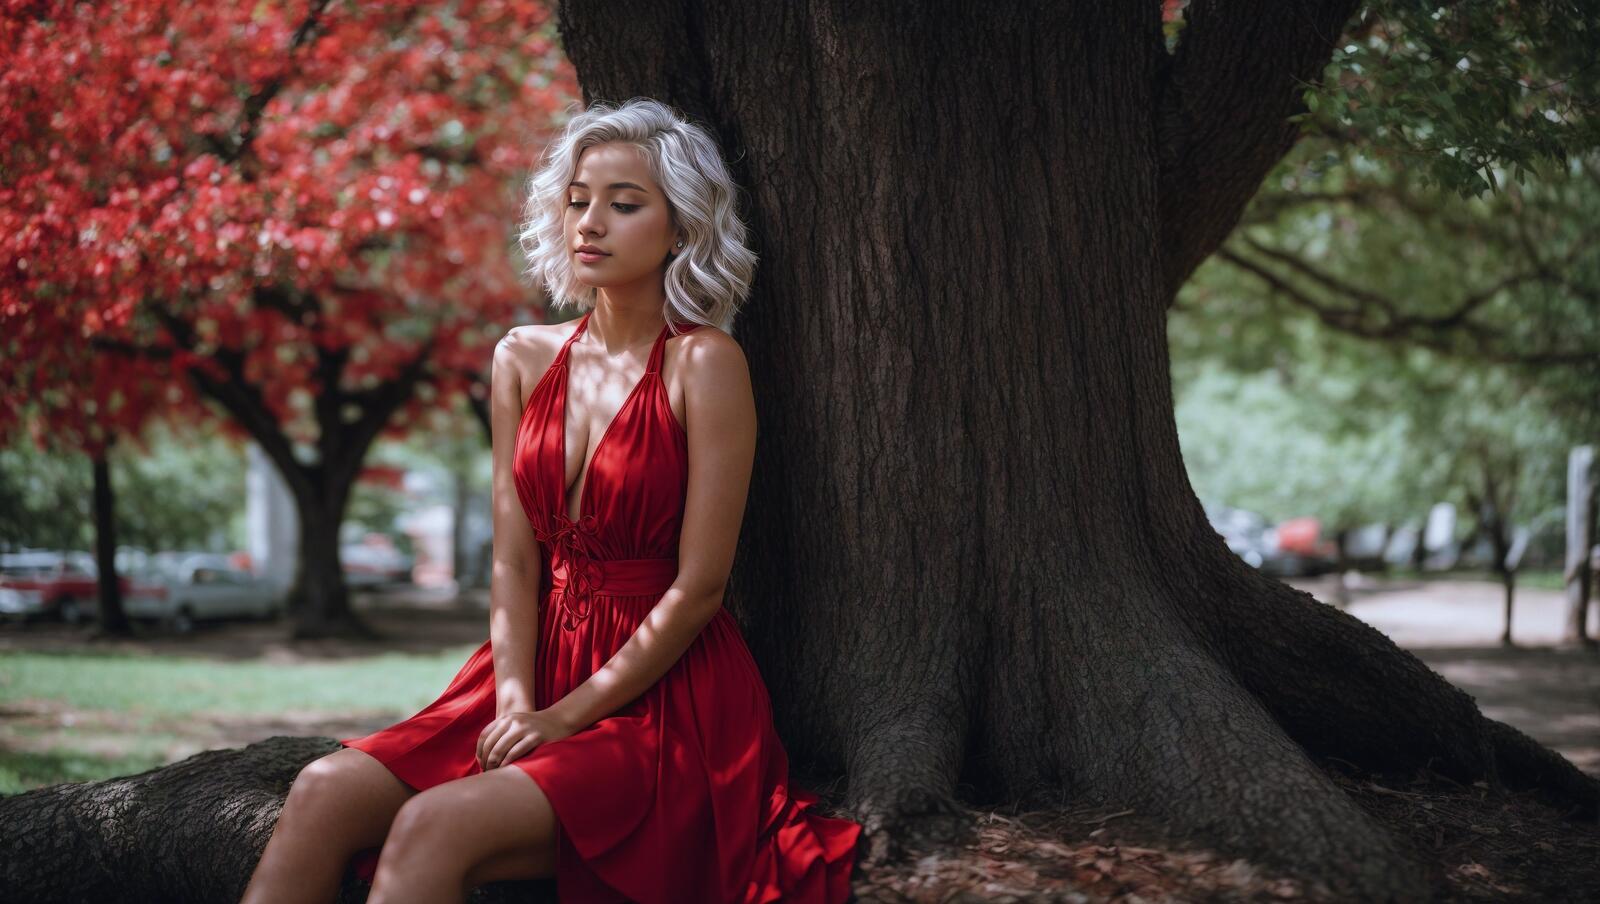 Free photo A woman sitting in front of a tree while wearing a red dress